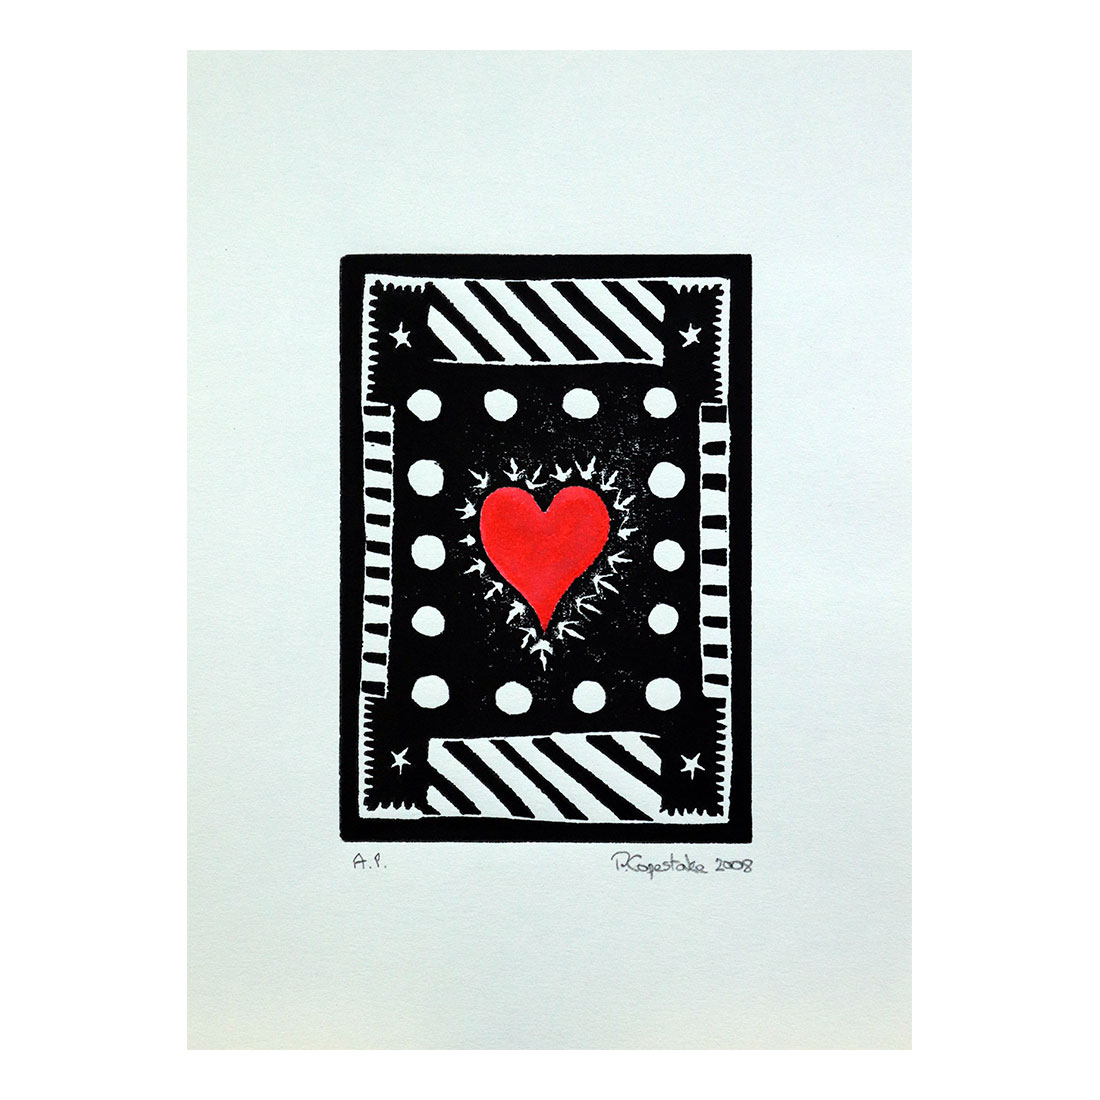 Heart 2008 Limited Edition Original Print by Philip Copestake